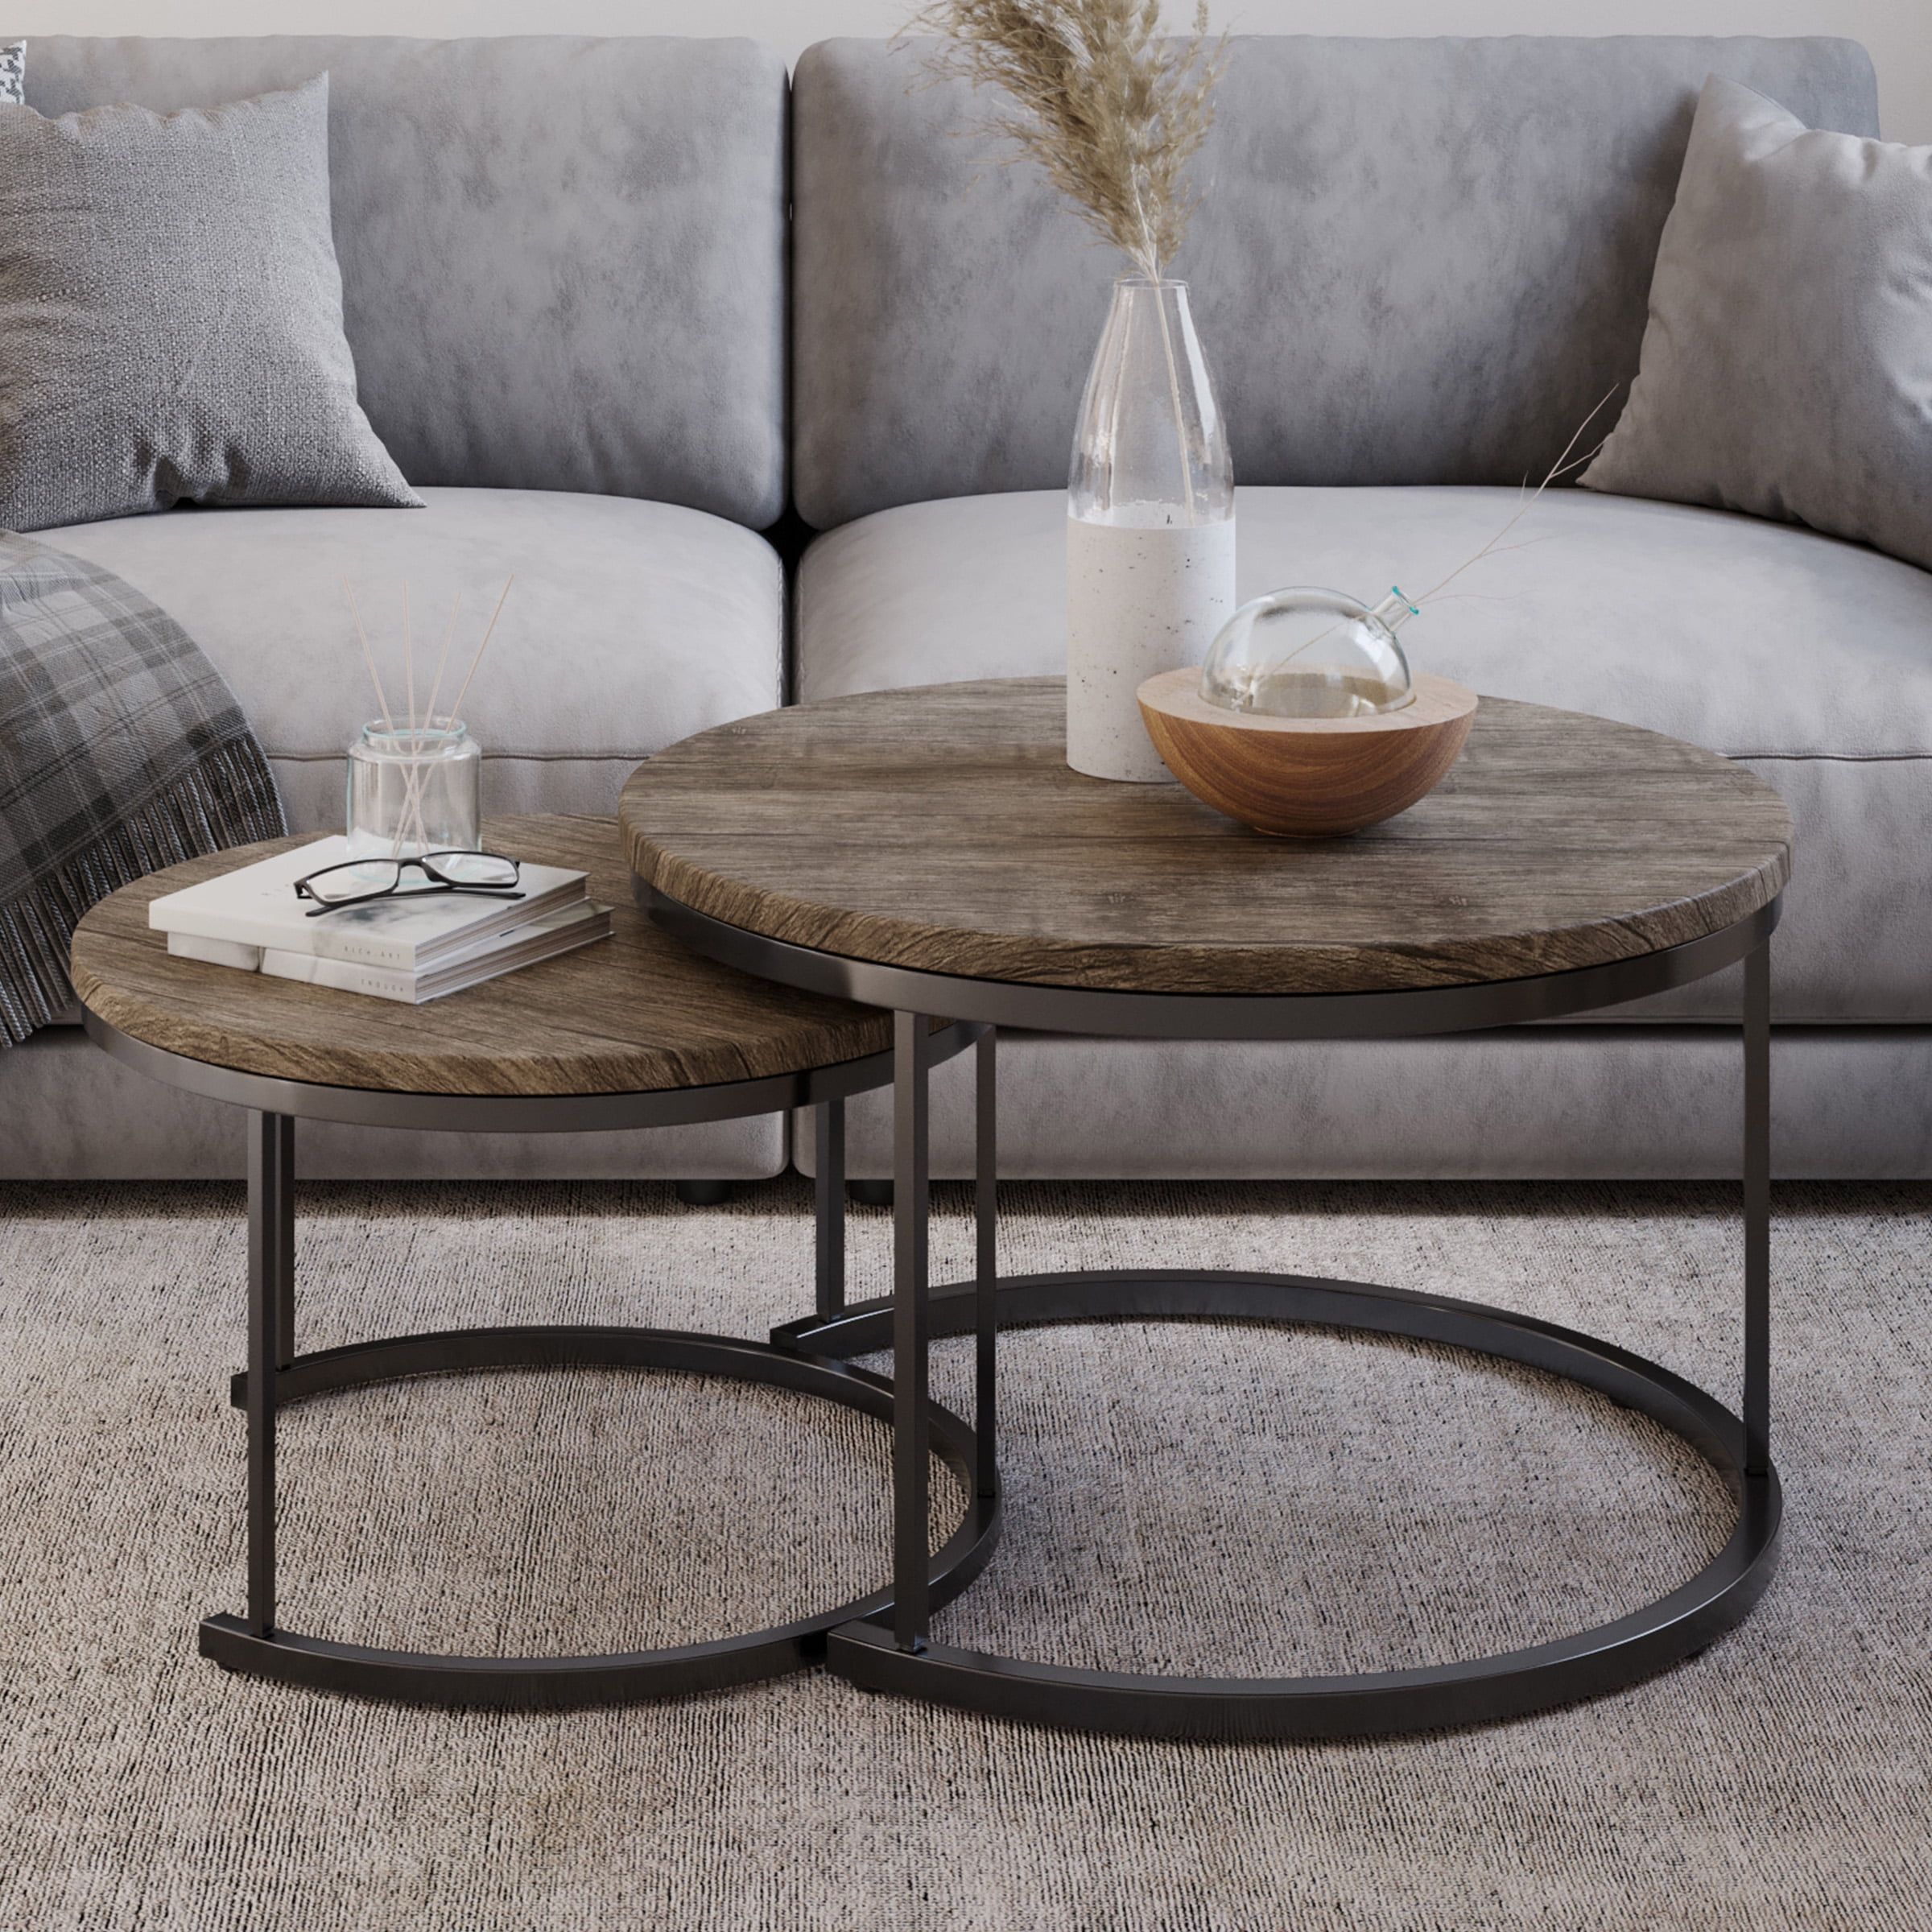 Lavish Home Round Coffee Table Set – 2 Piece Nesting Tables To Use Together  Or Separately – Modern Farmhouse Style (Gray Brown) – Walmart Inside Modern Nesting Coffee Tables (Photo 14 of 15)